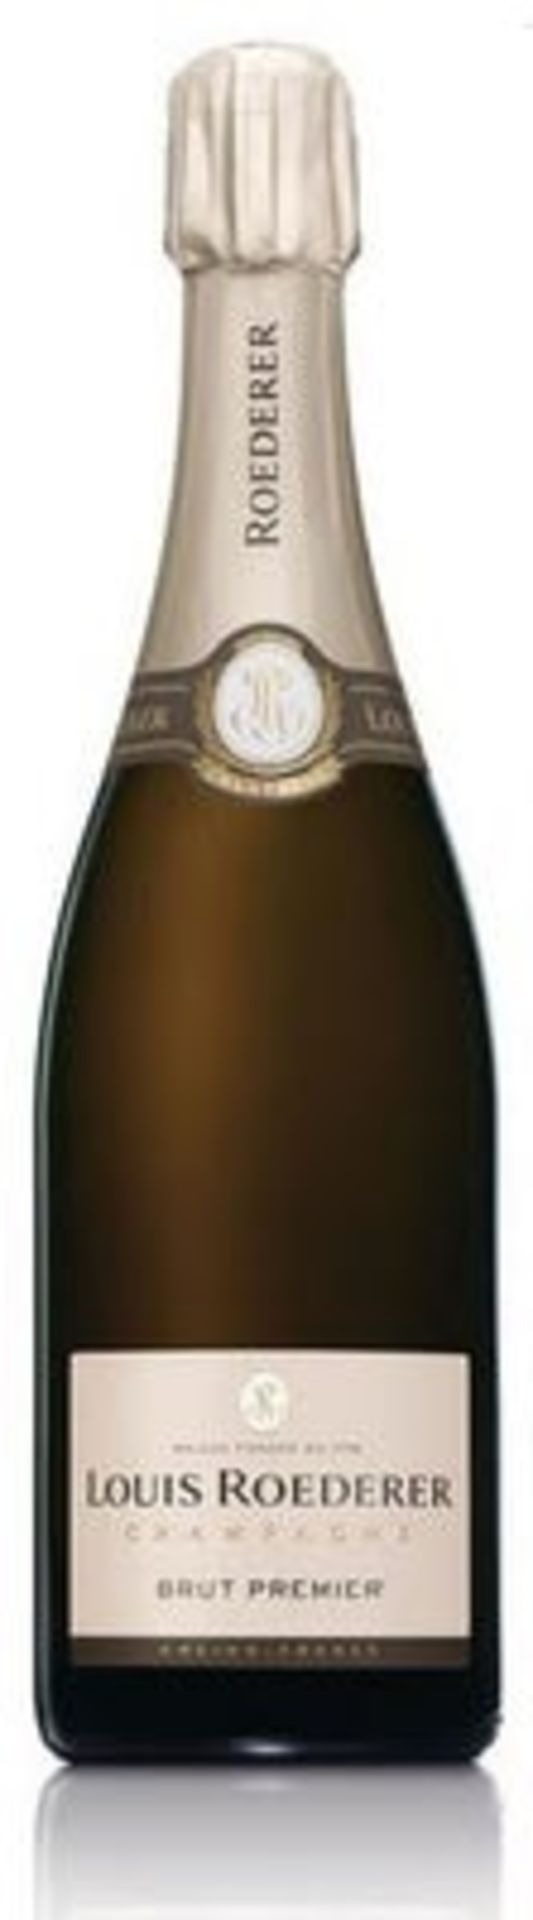 Louis Roederer Brut Premier Champagne 75 Cl ( Bid Is For 1x Bottle Option To Purchase More) - Image 2 of 2